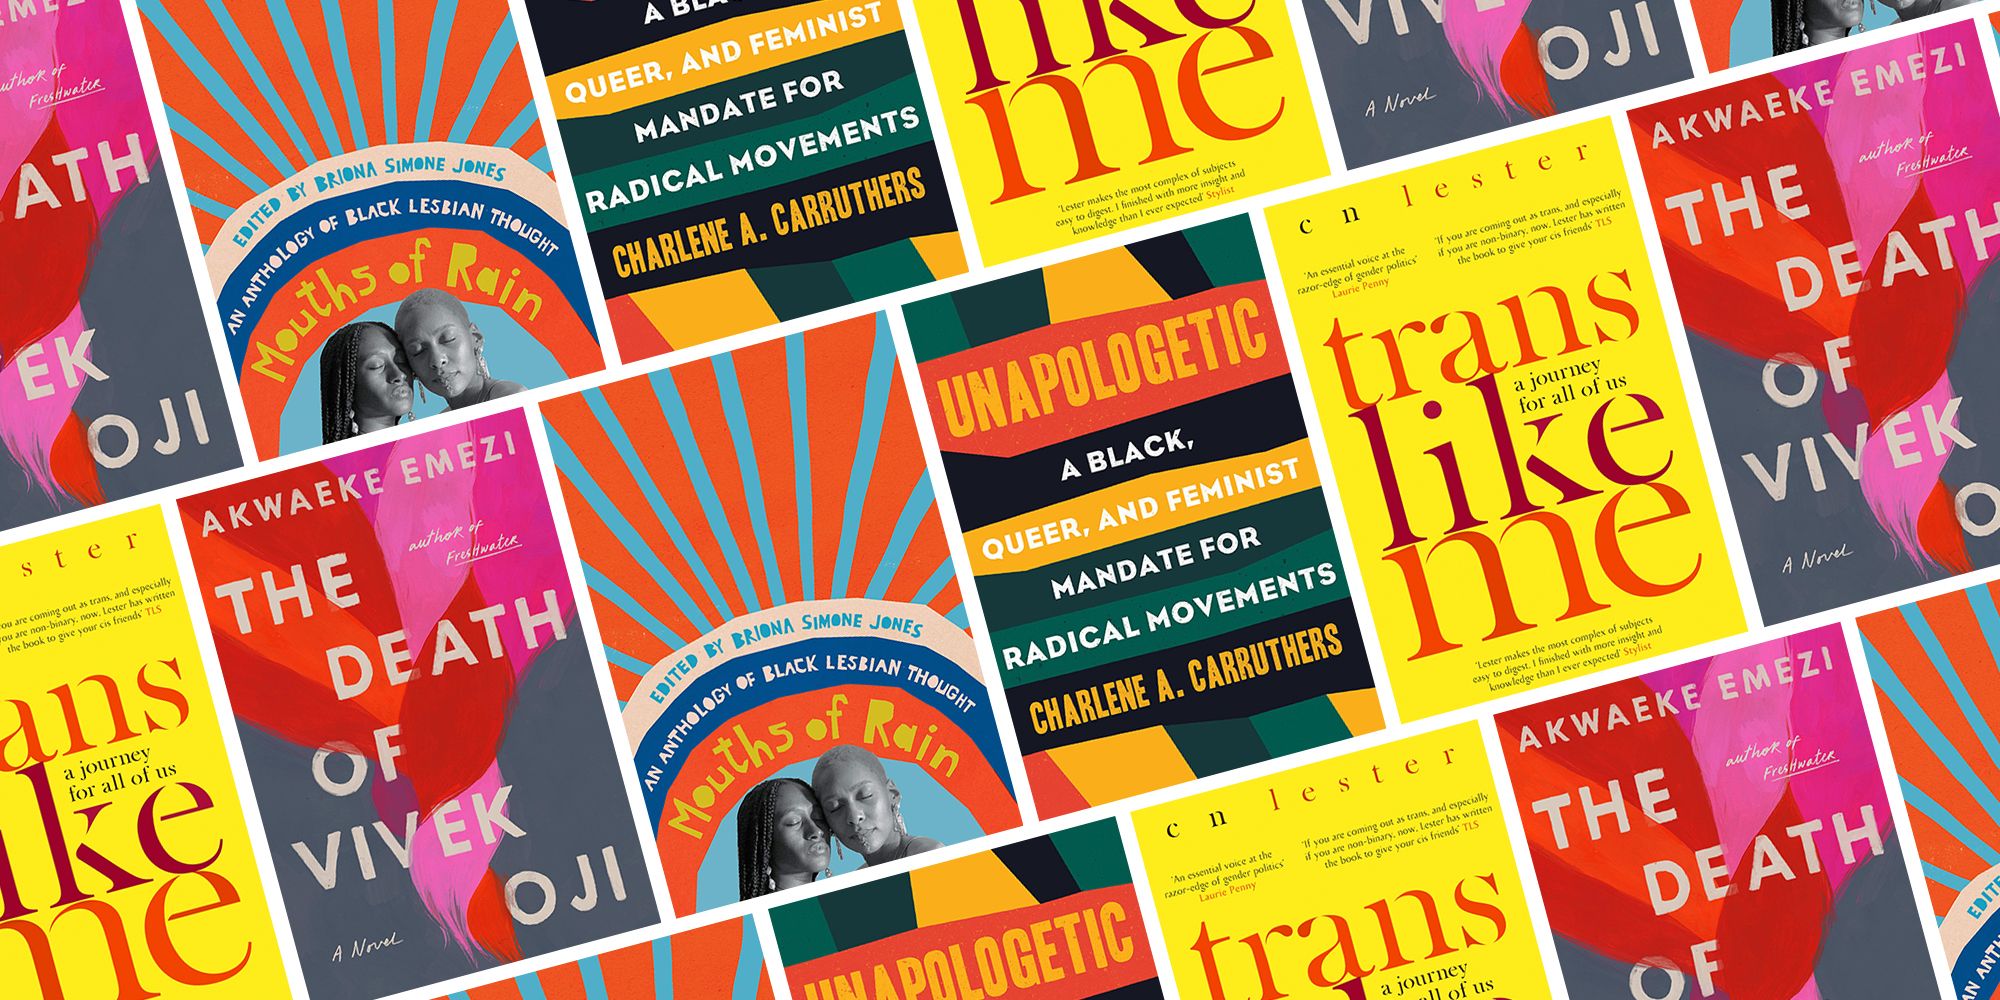 Must-read books by women, as chosen by our readers